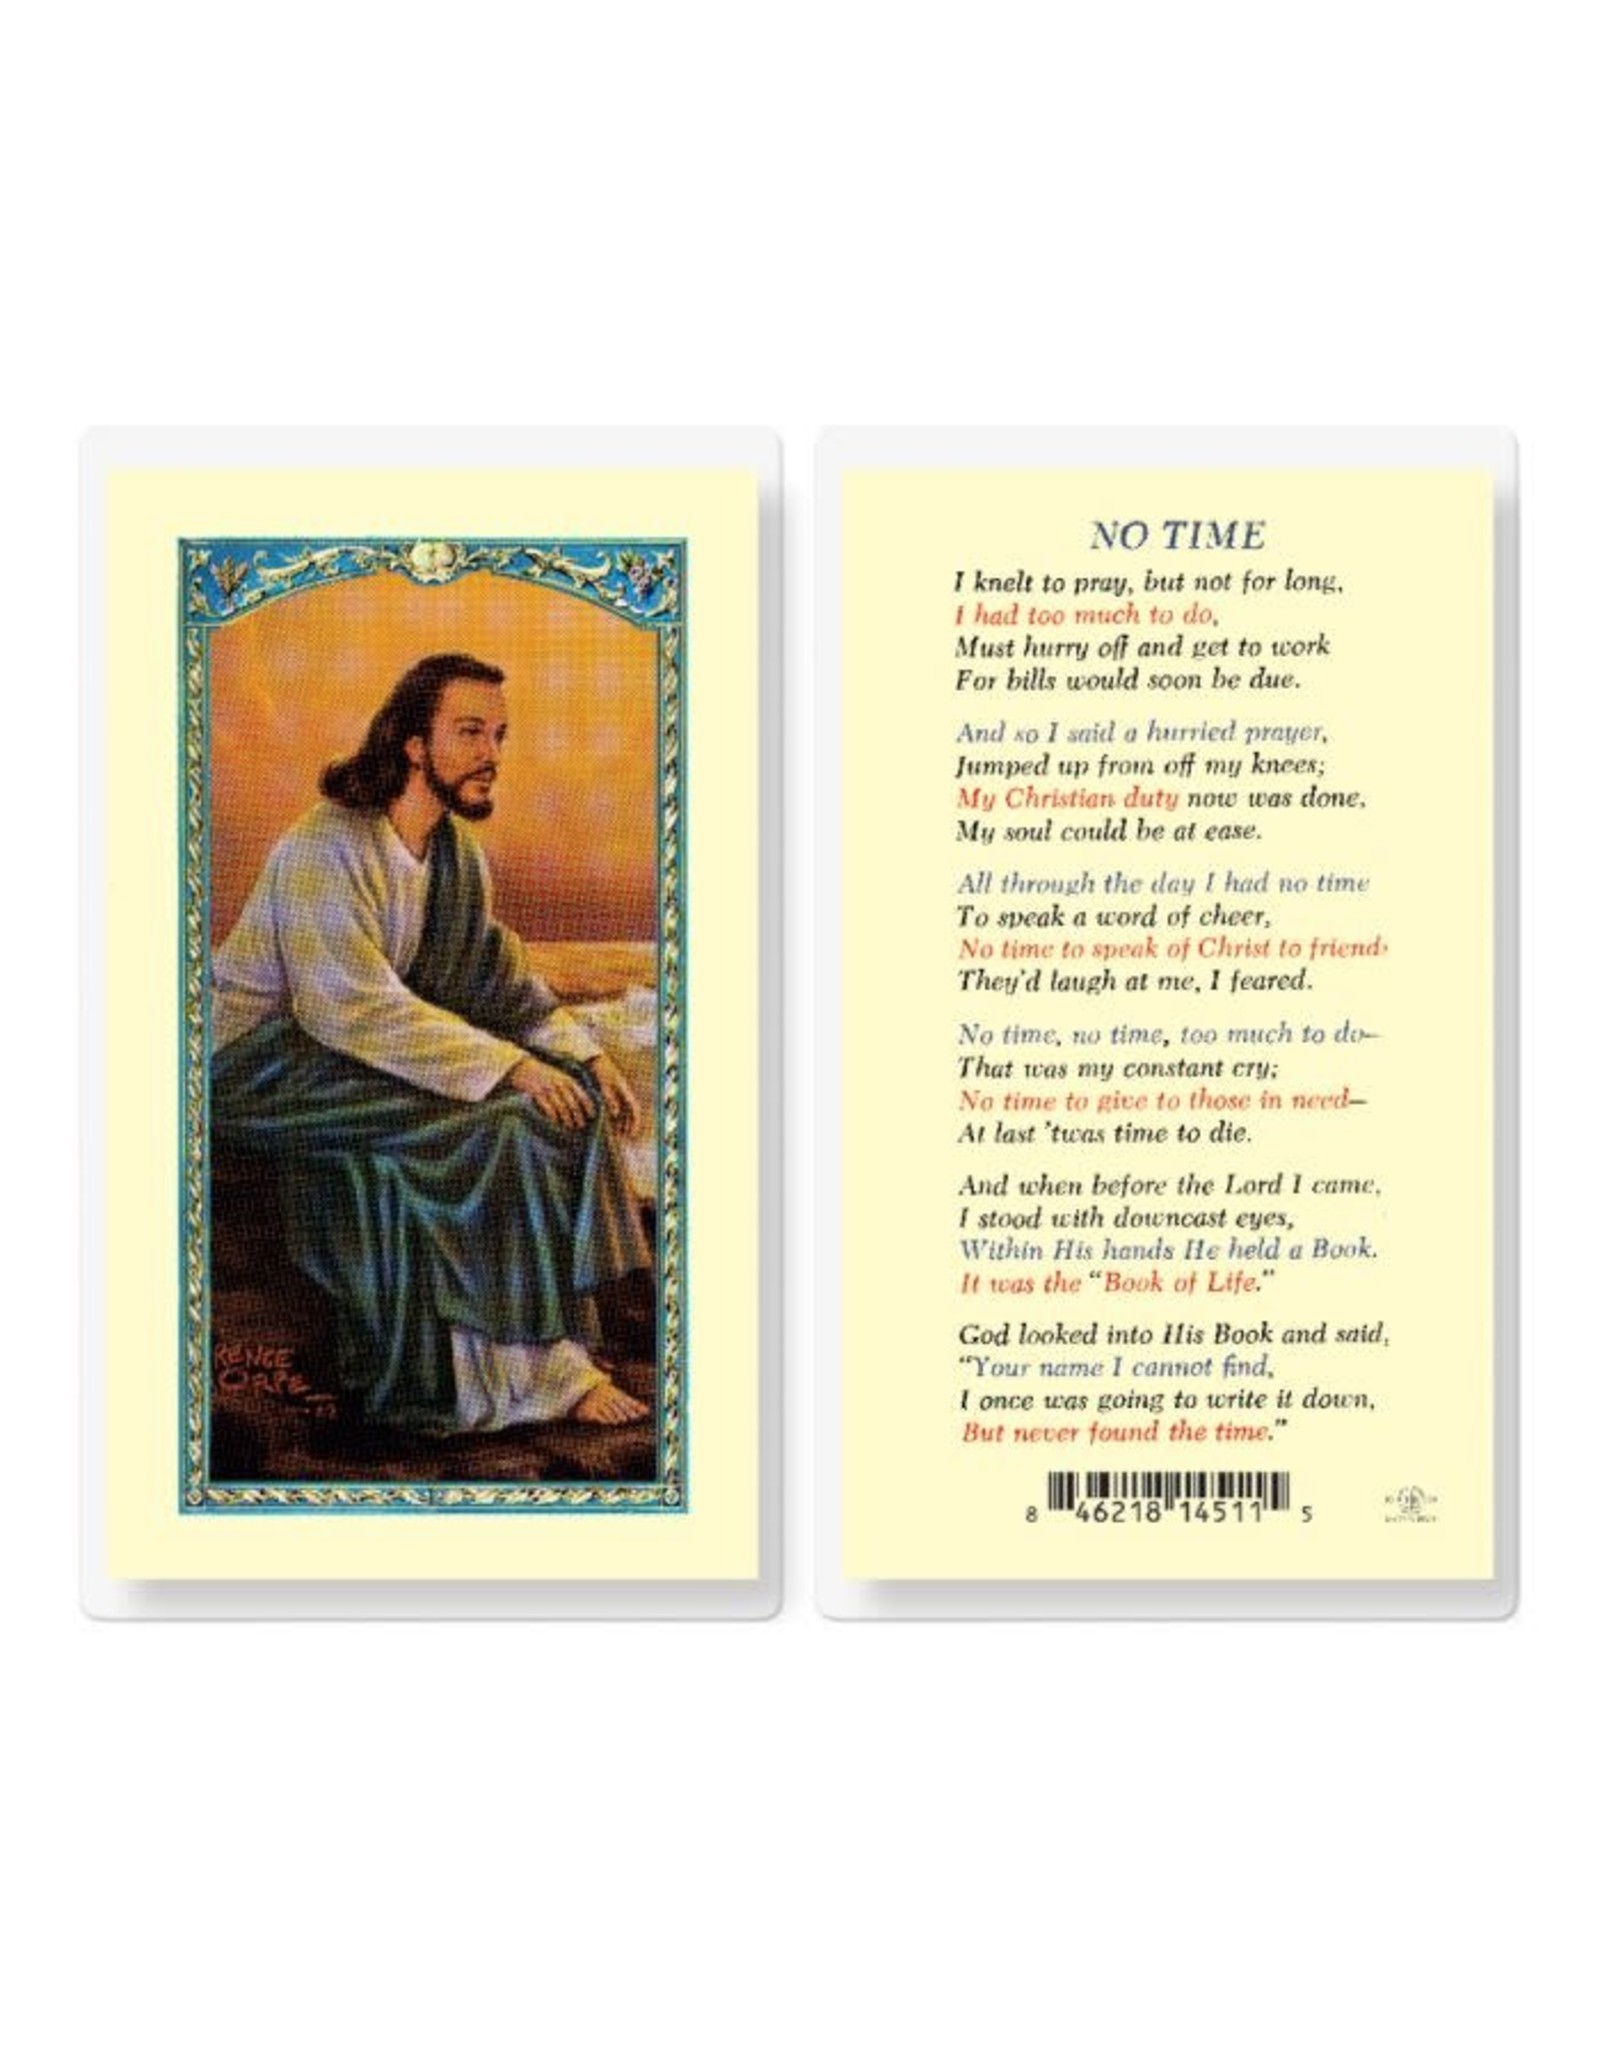 Hirten Holy Card, Laminated - No Time with Christ by the Sea